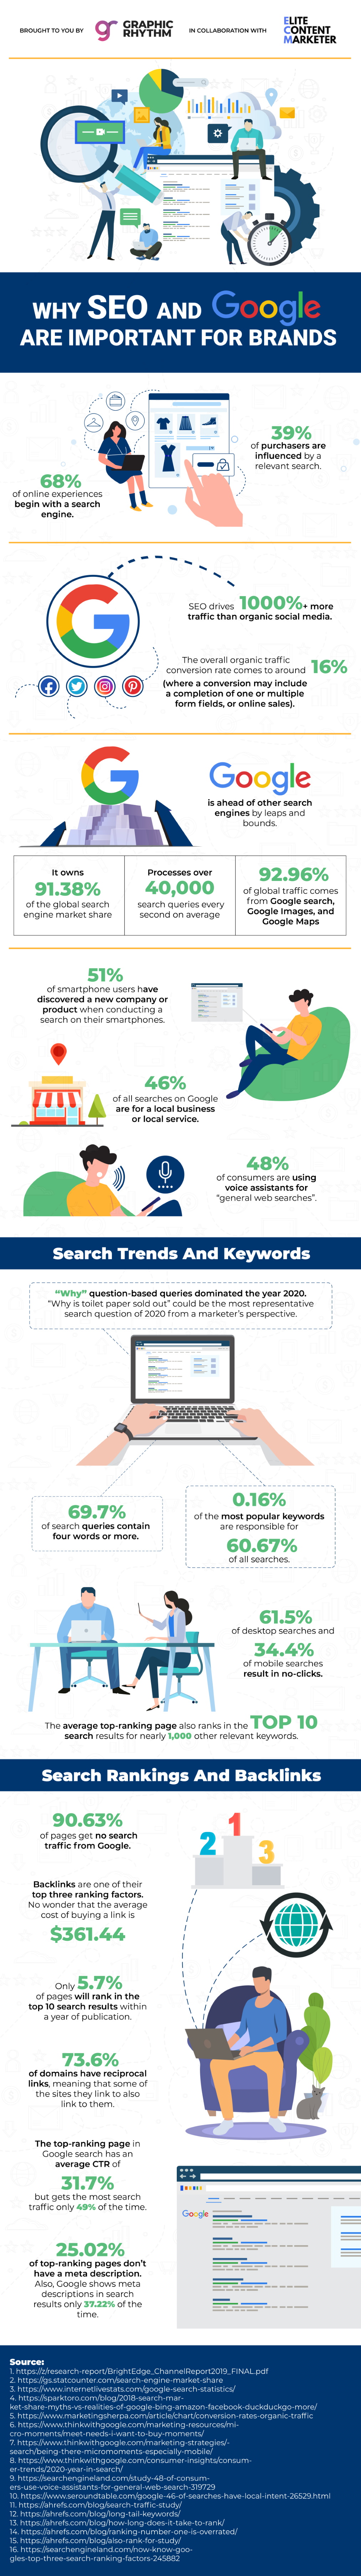 State of SEO in 2021 [Infographic]